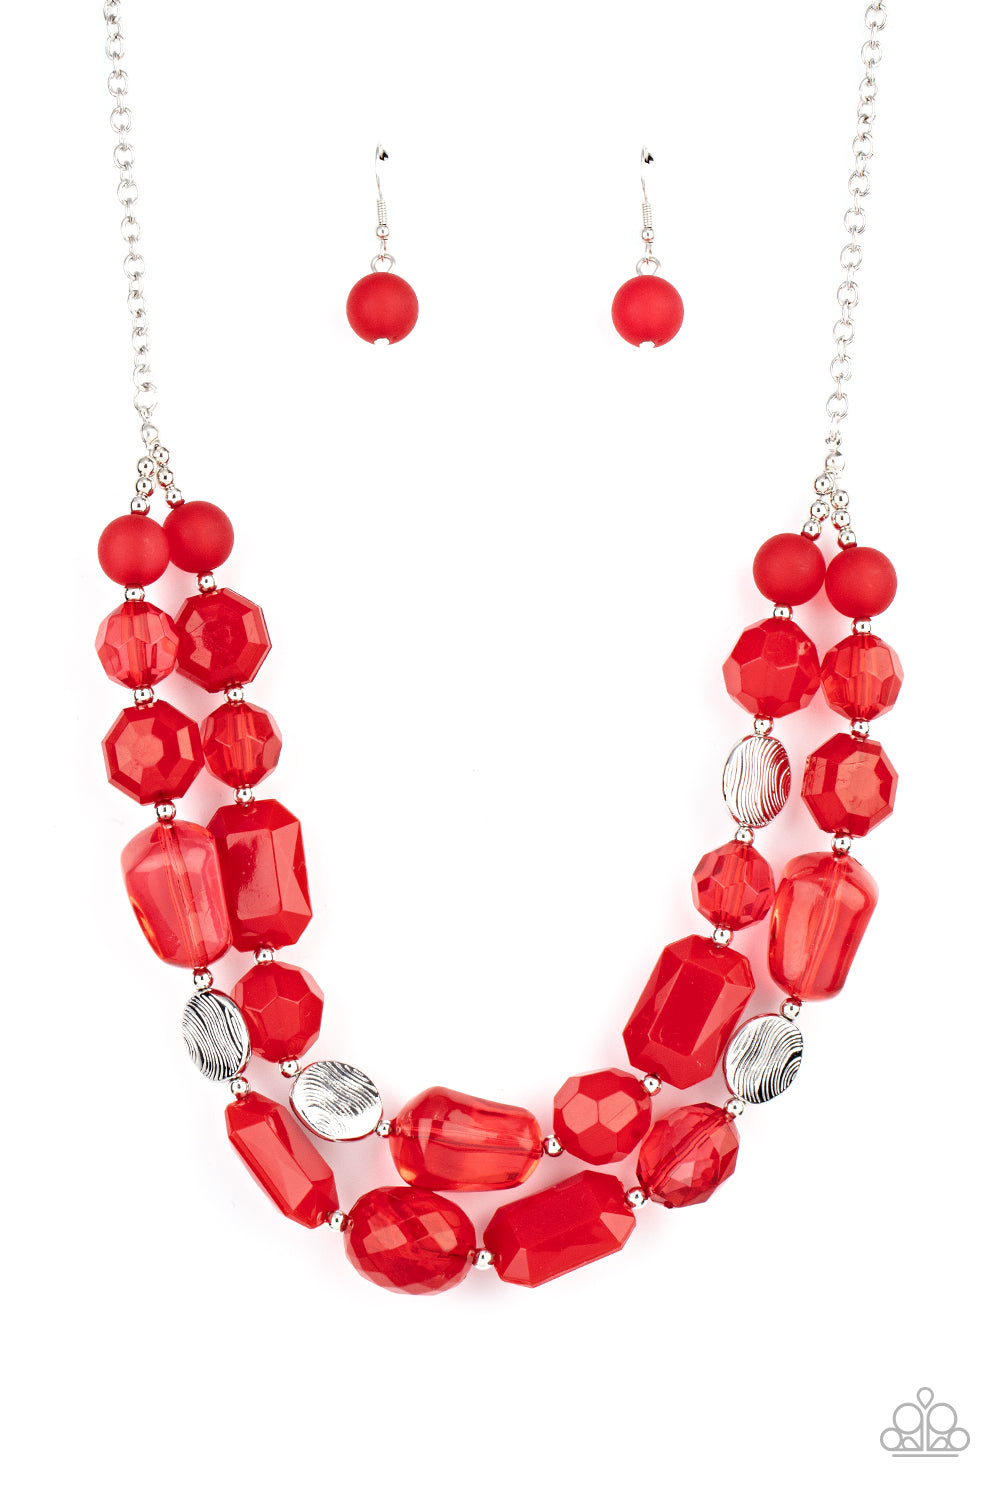 Oceanic Opulence Red Necklace - Paparazzi Accessories  Varying in shape and opacity, faceted and smooth red glassy beads join textured silver discs and dainty silver beads along two dainty wires, layering into a flamboyant pop of color below the collar. Features an adjustable clasp closure.  All Paparazzi Accessories are lead free and nickel free!  Sold as one individual necklace. Includes one pair of matching earrings.